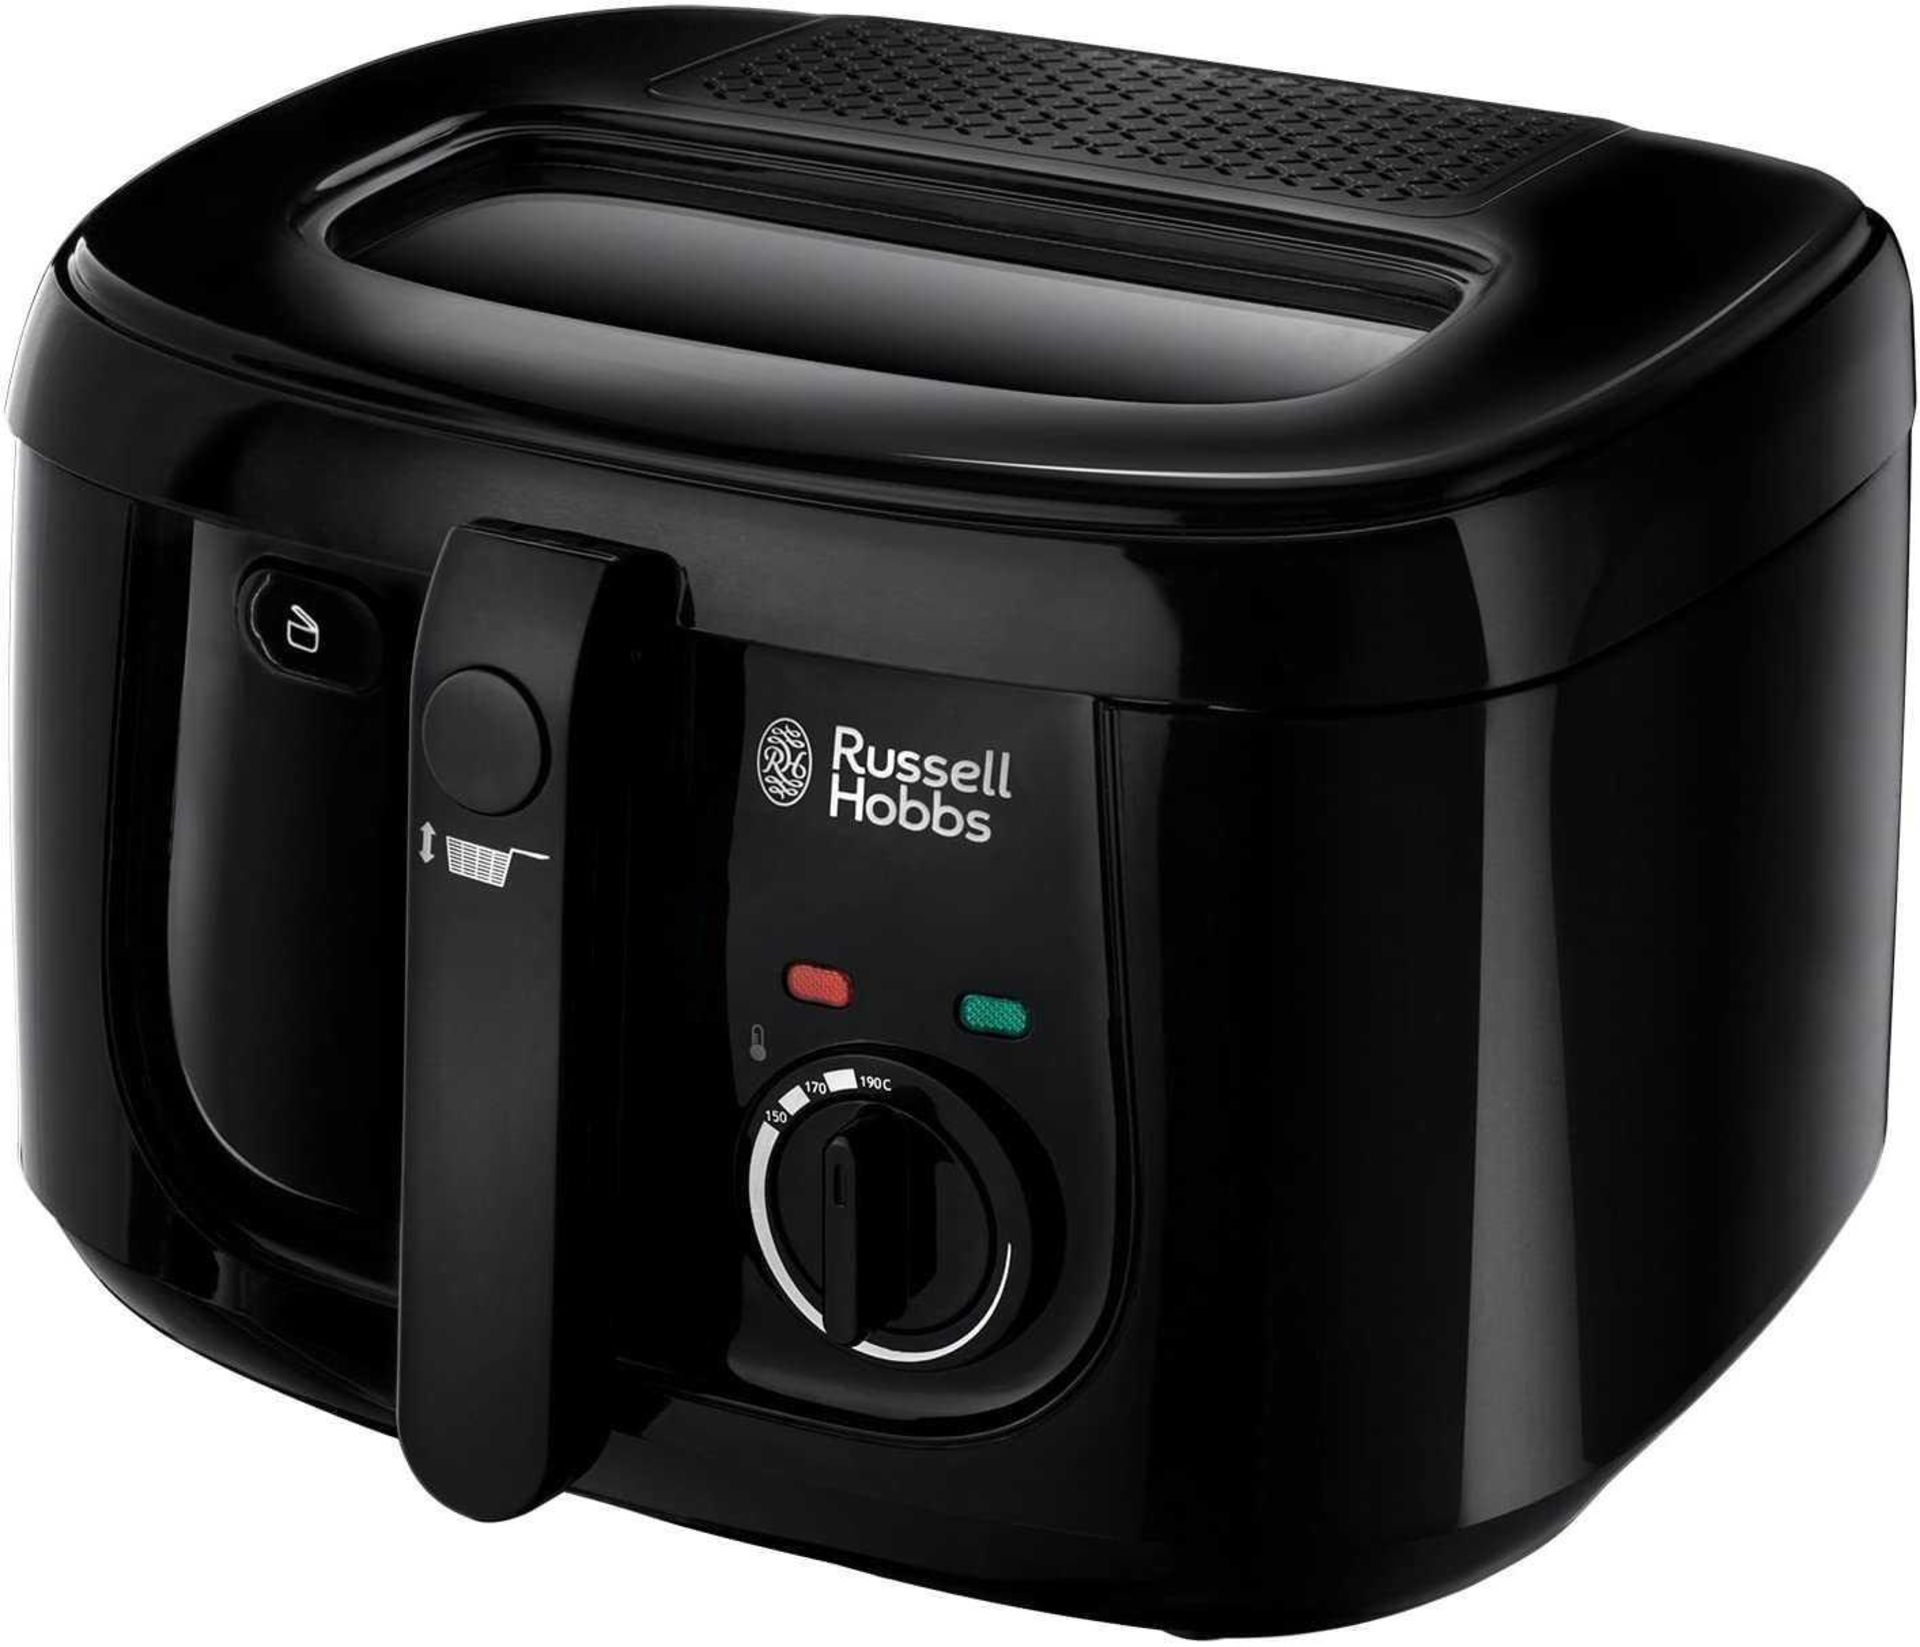 Combined RRP £100 Lot To Contain 3 Russell Hobbs Food Collection Deep Fryers In Black With 2.5L Capa